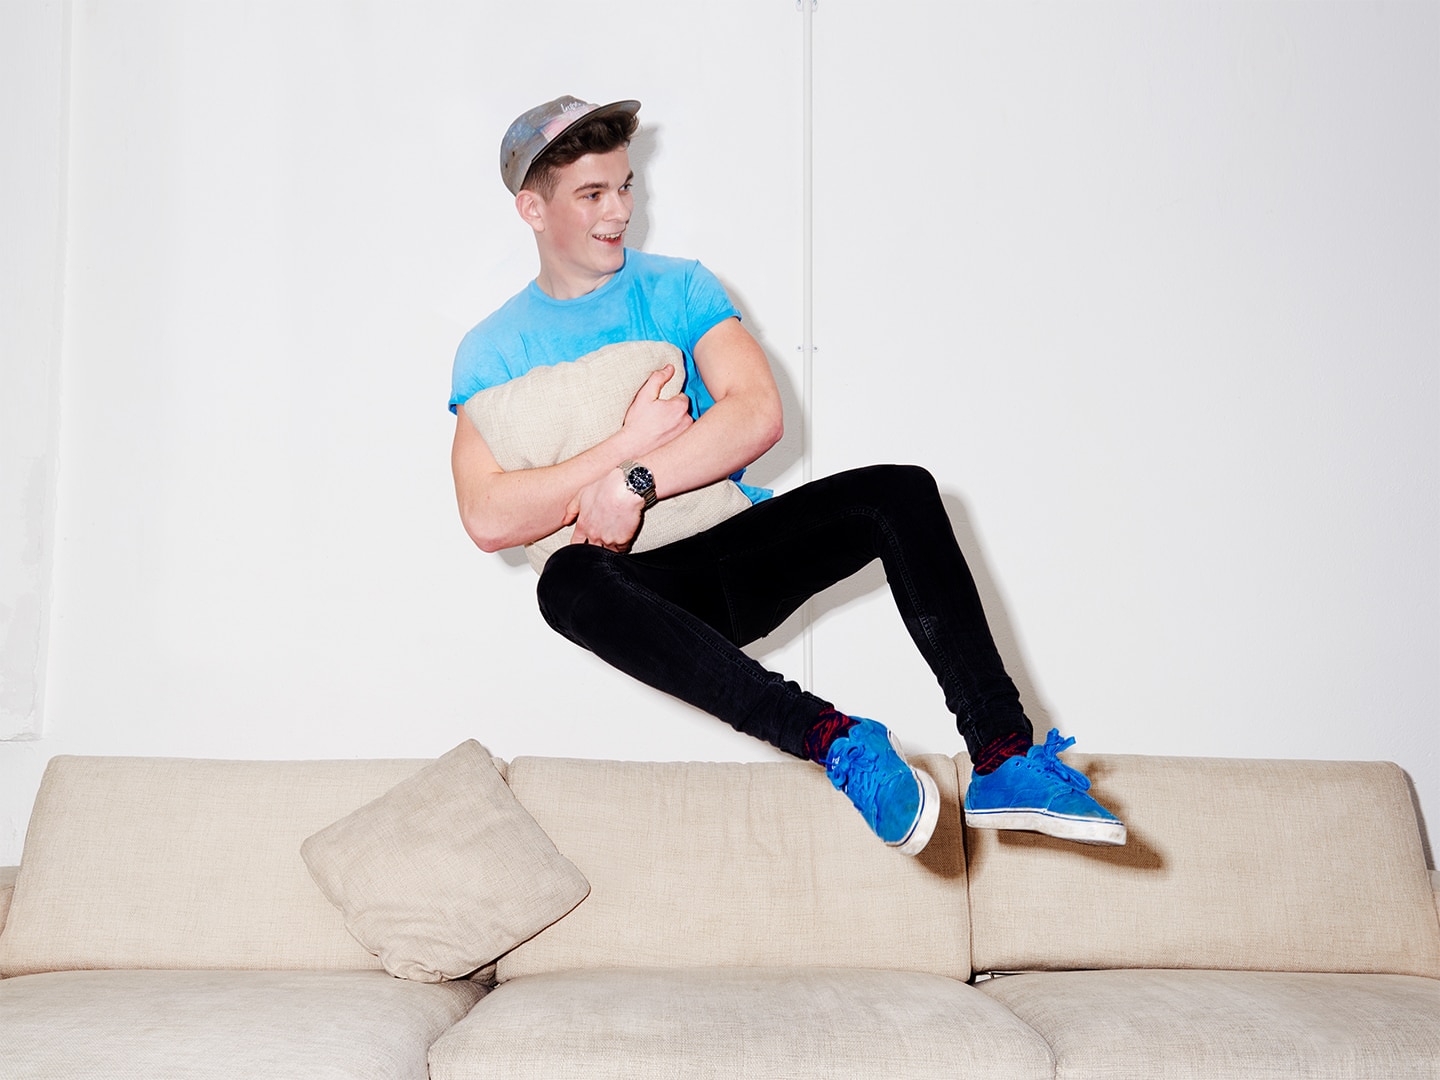 Guy in blue t-shirt and cap falling onto a sofa holding a cushion